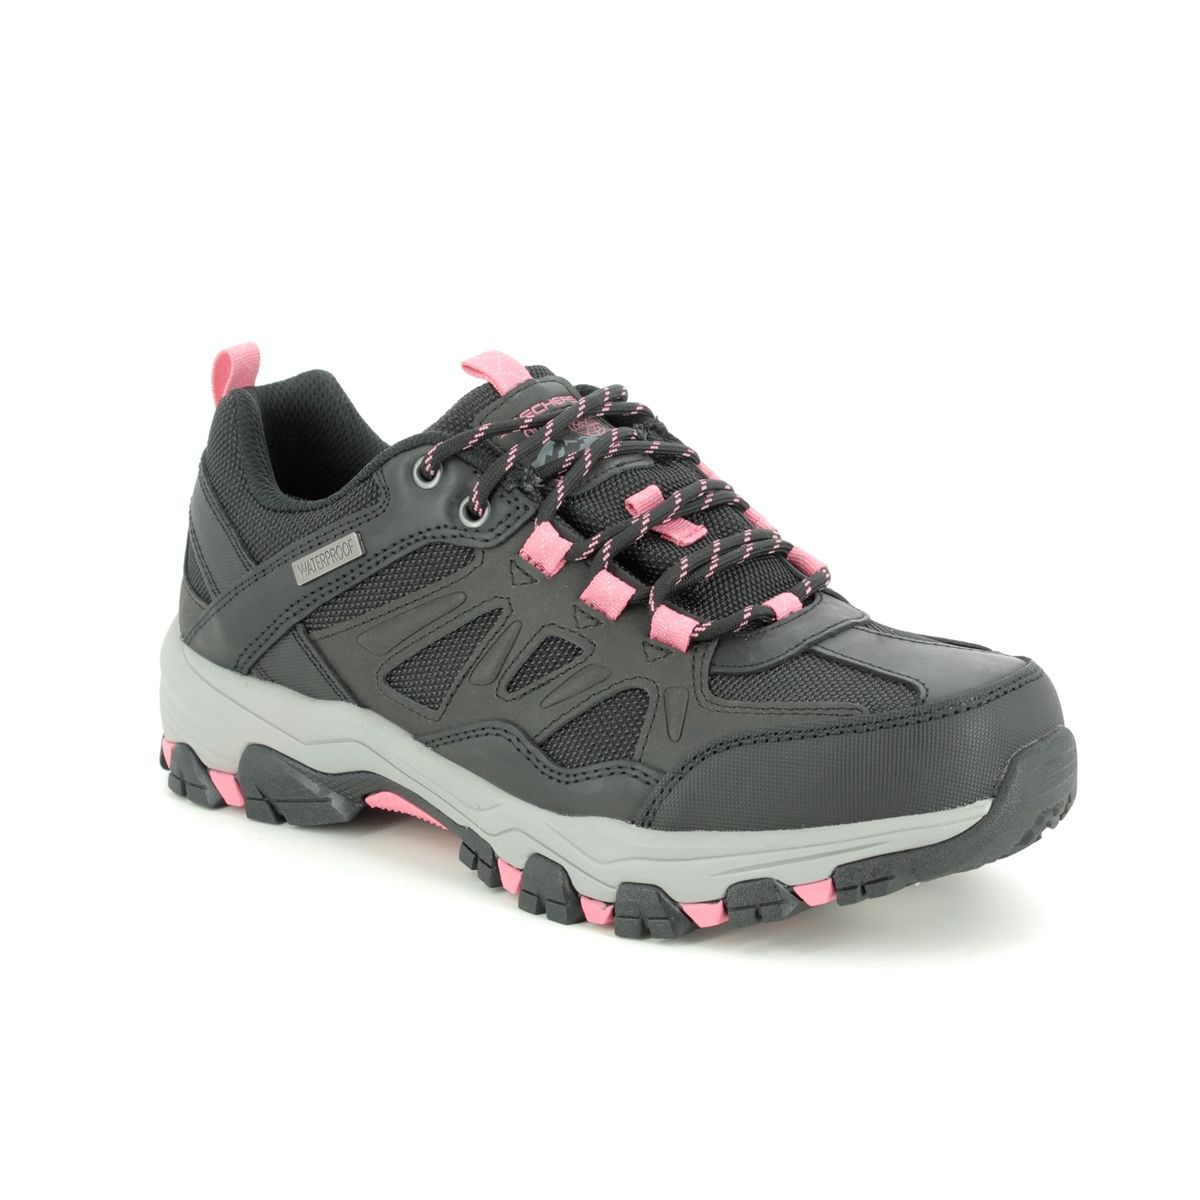 Skechers Selmen West Relaxed BKCC Black Charcoal Grey Womens Walking Shoes 167003 in a Plain Leather in Size 7